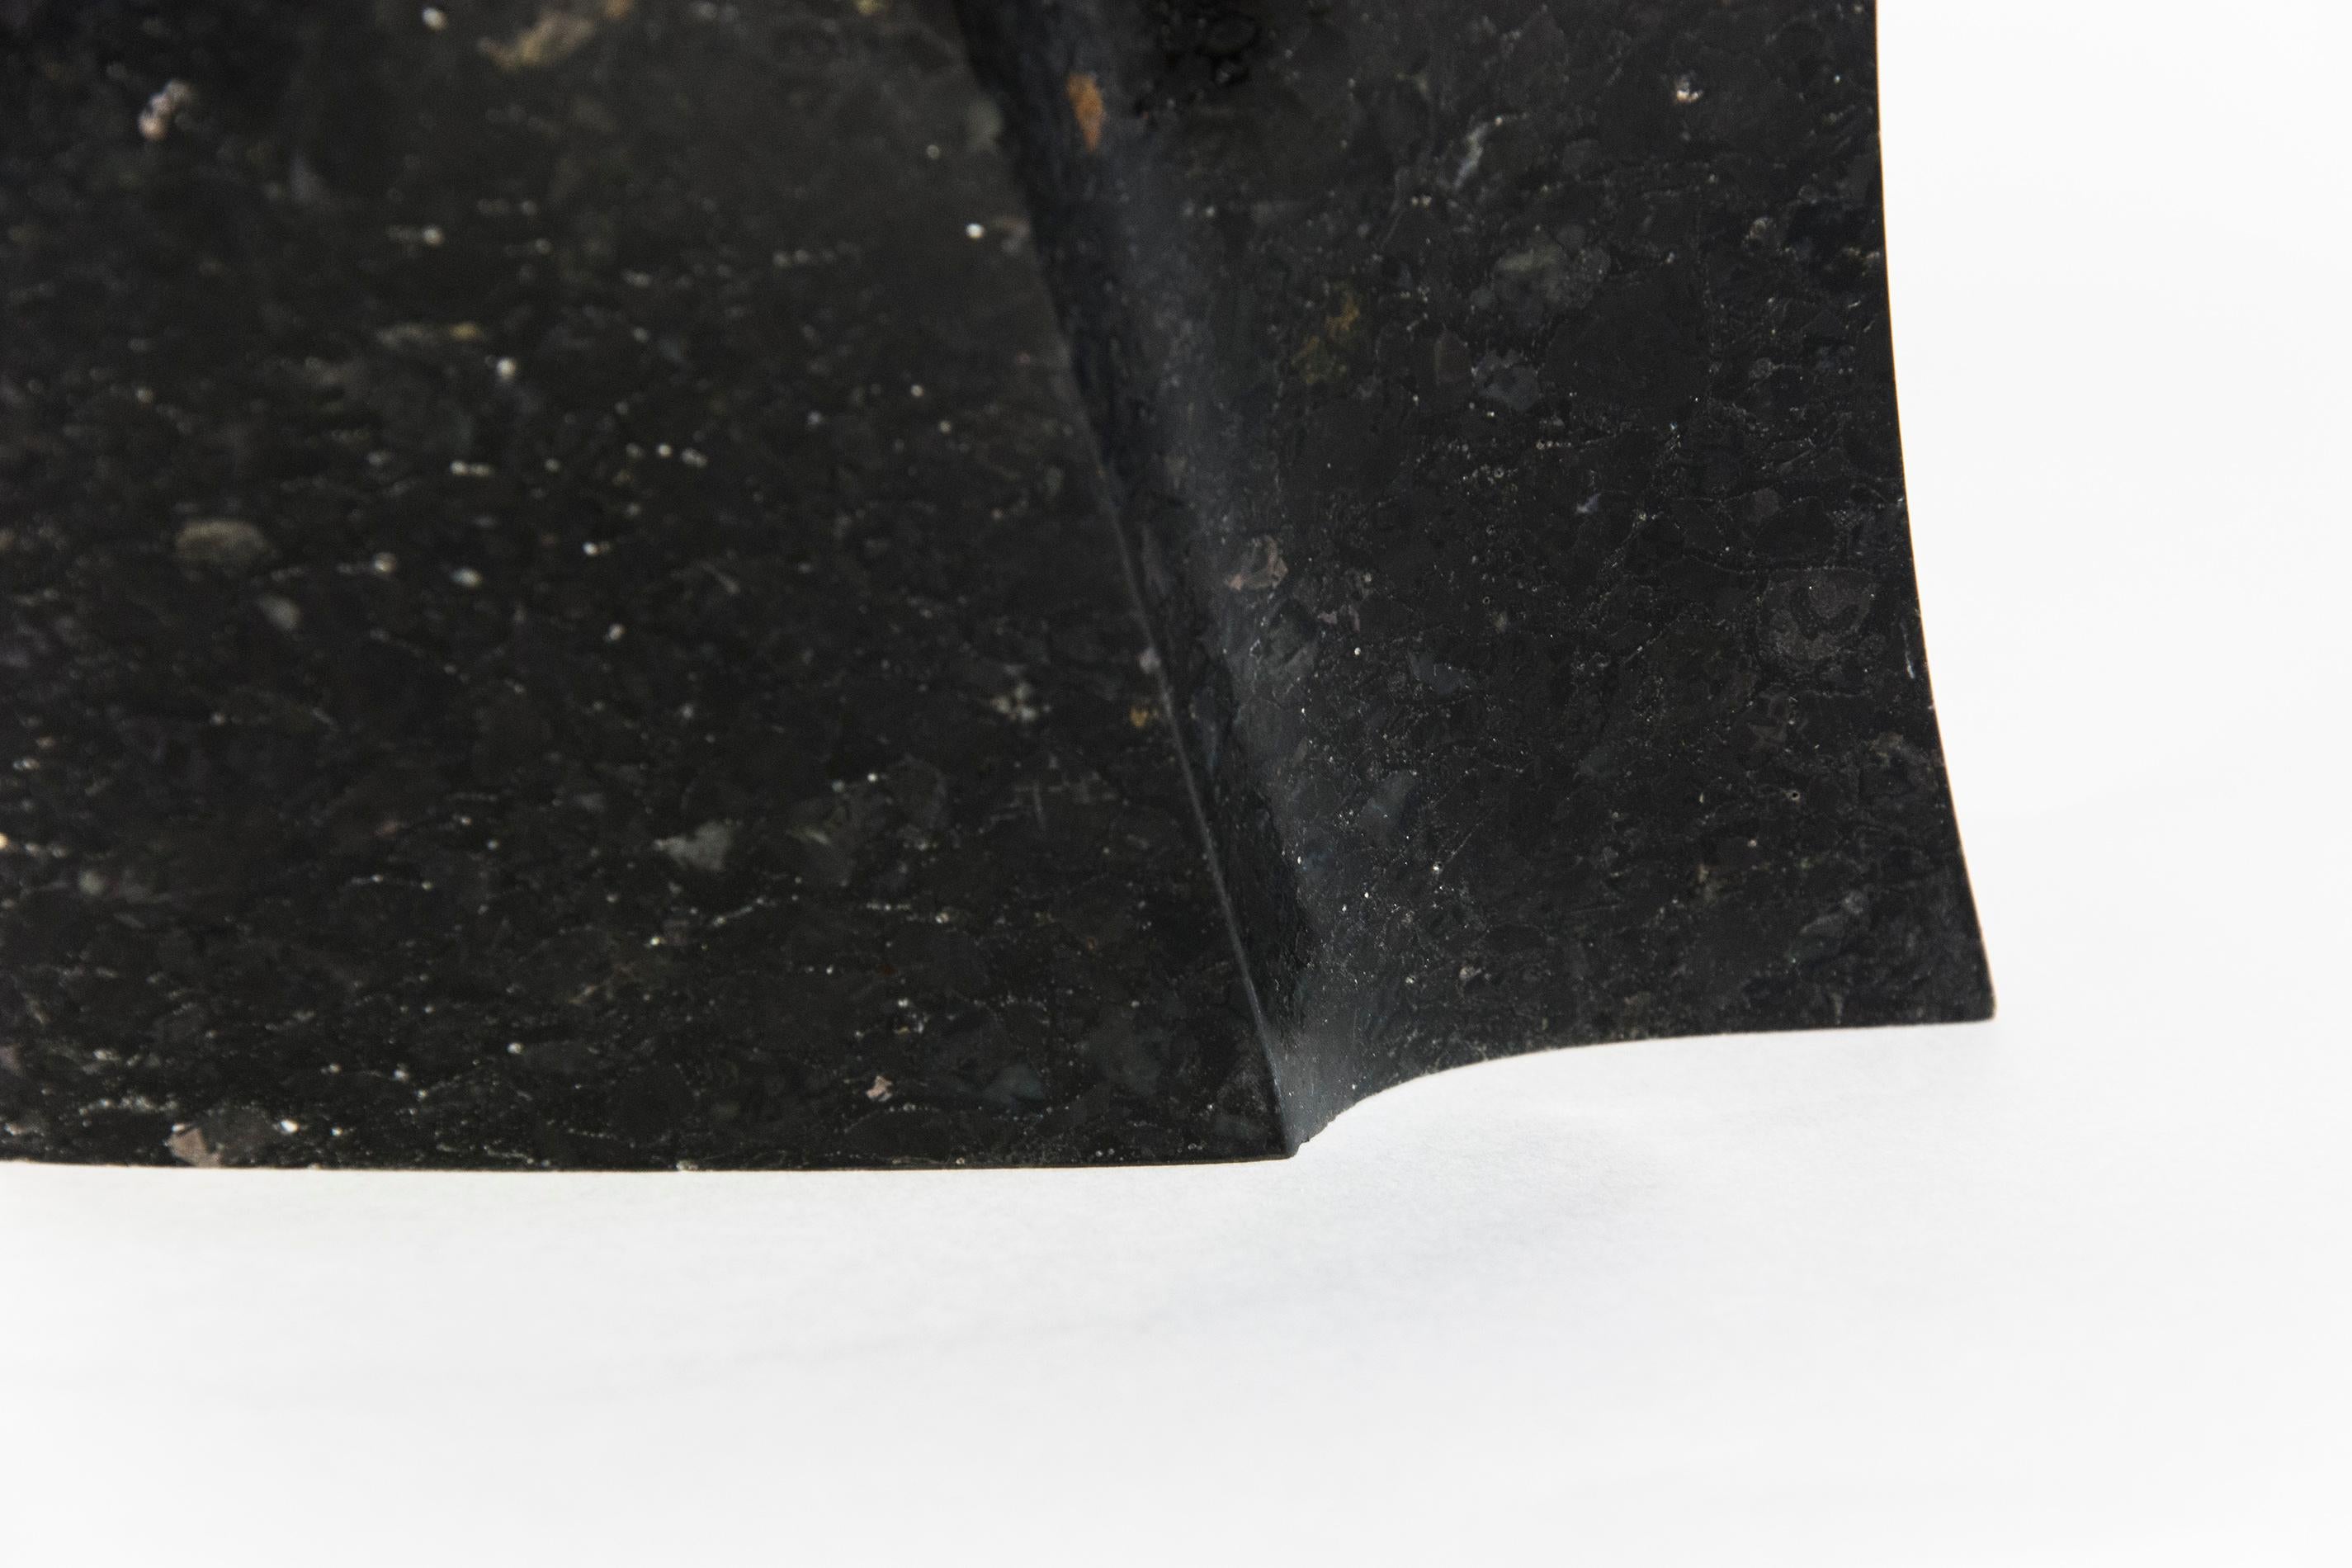 Embrace 1/50 - small, smooth, polished, abstract, black granite sculpture - Contemporary Sculpture by Jeremy Guy